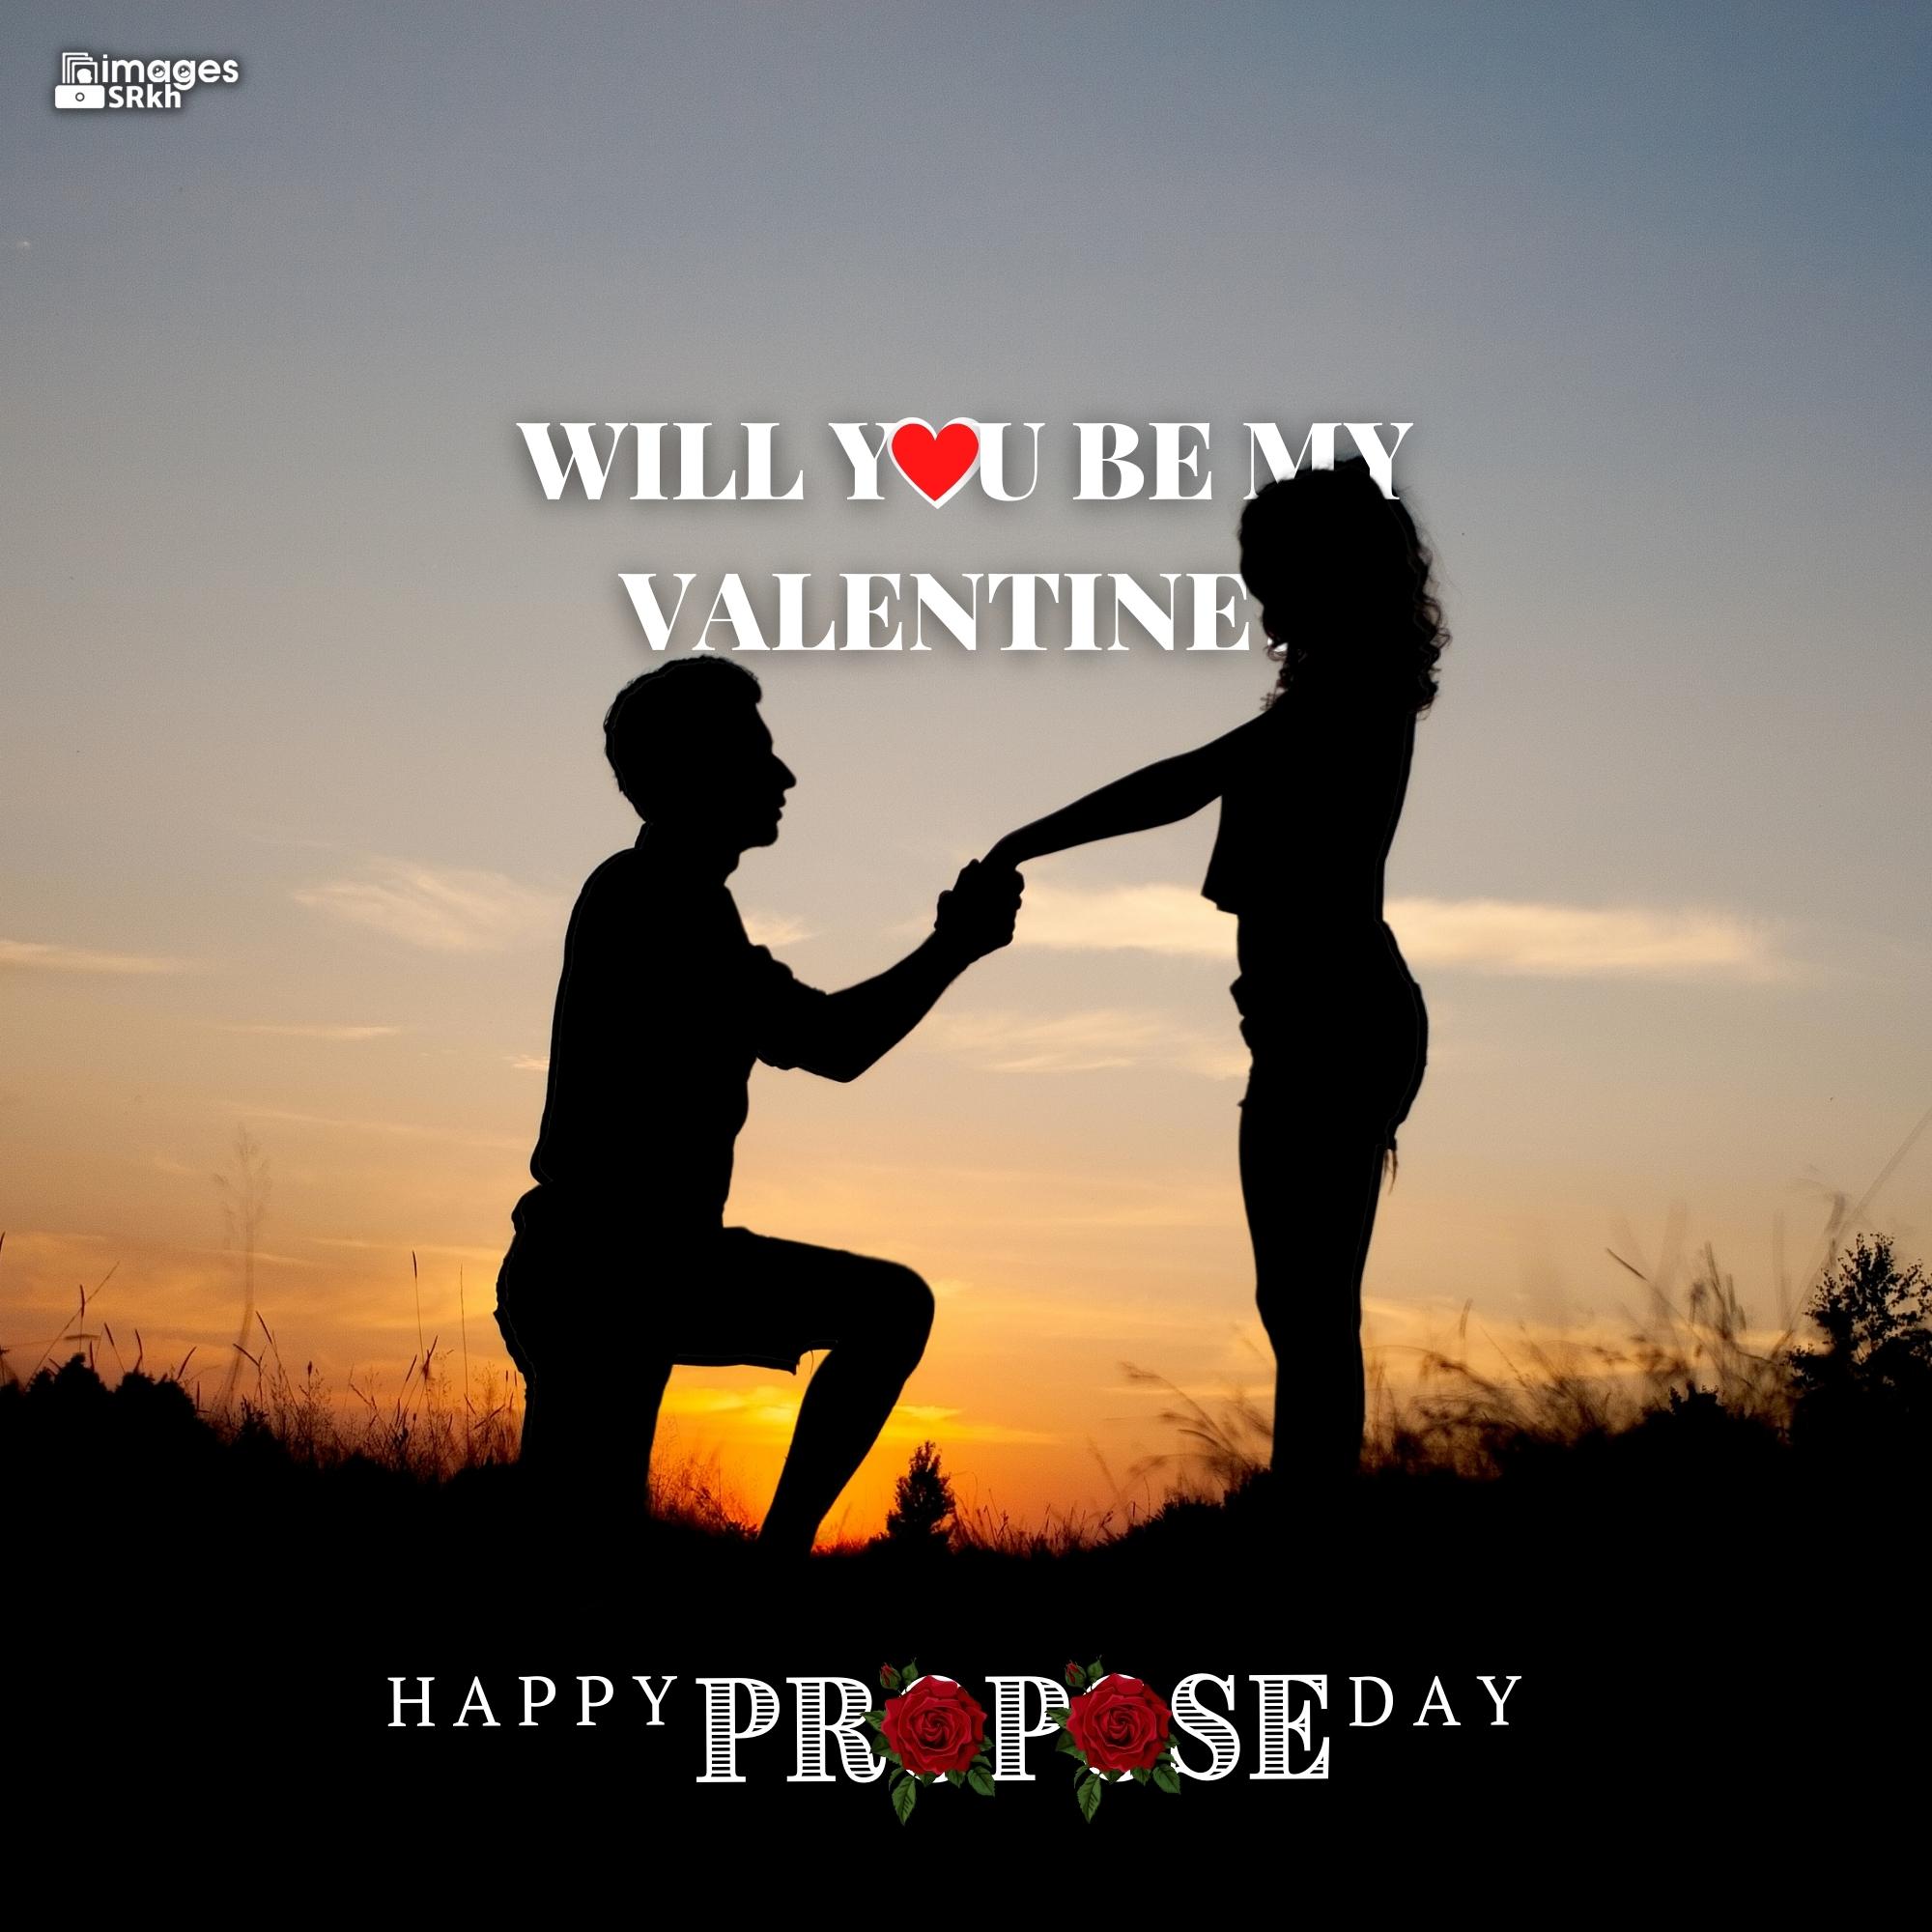 Propose Day Images | 207 | Will You Be My Valentine